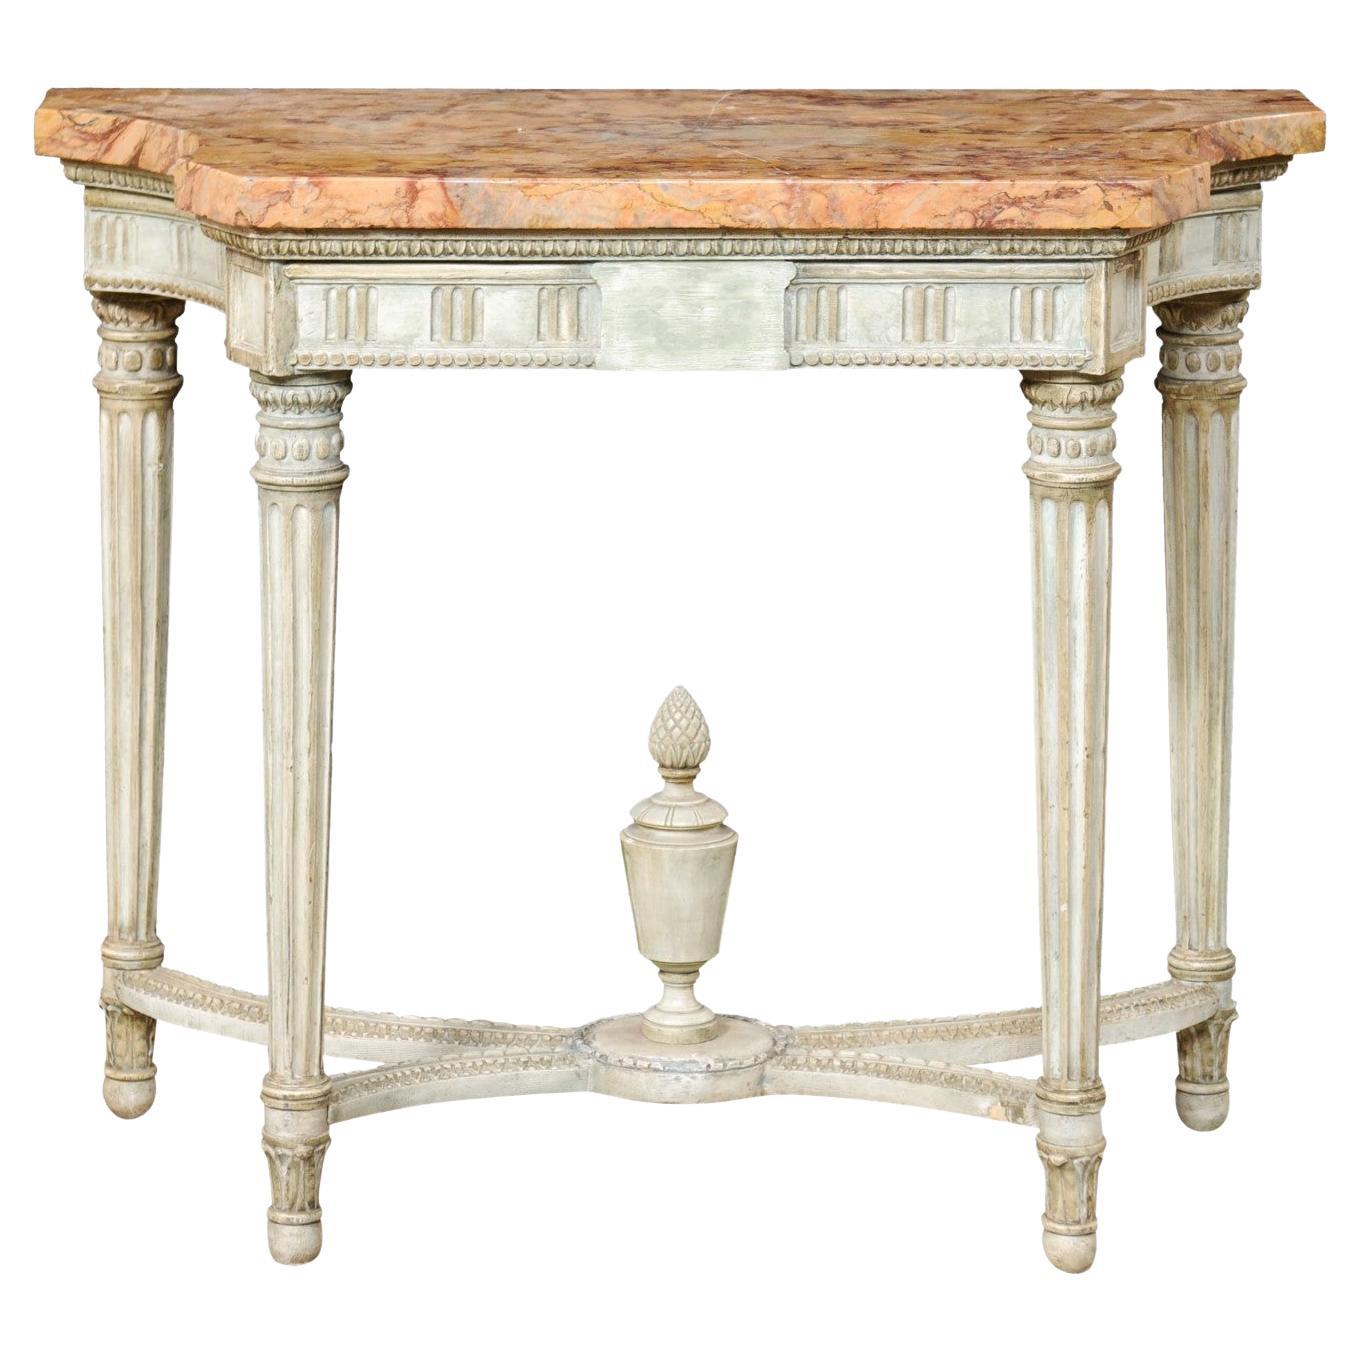 French Neoclassic Period Marble Top Console w/Carved Urn Finial at Underside For Sale